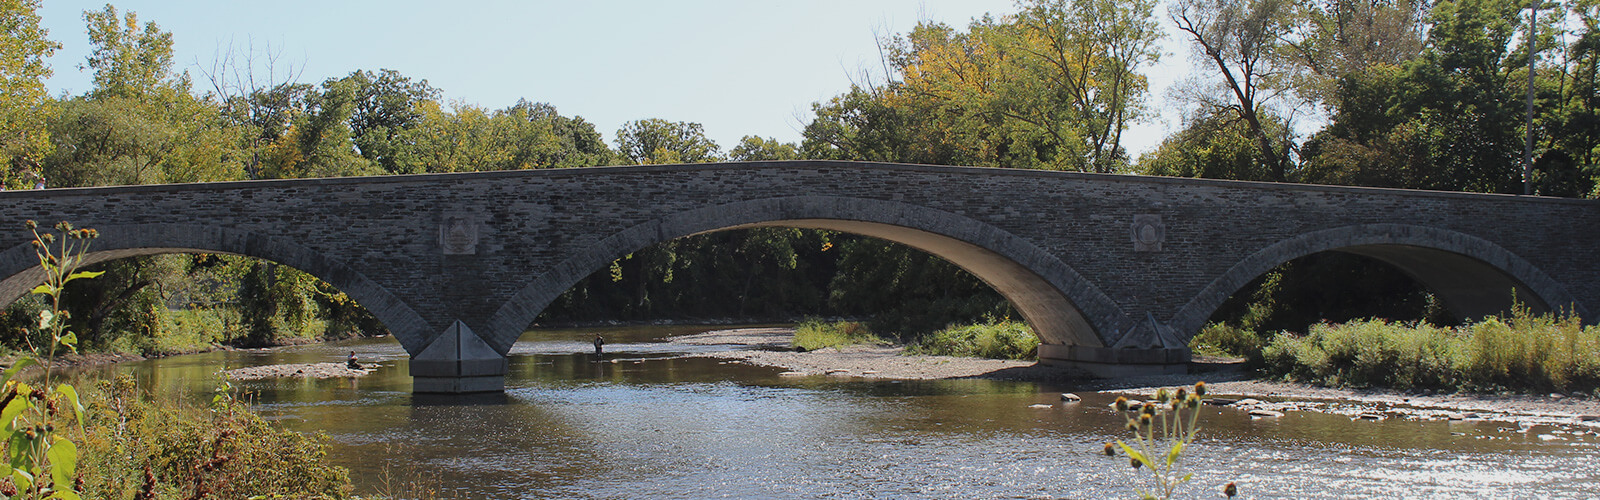 Old Mill Bridge and the Humber River on a sunny day